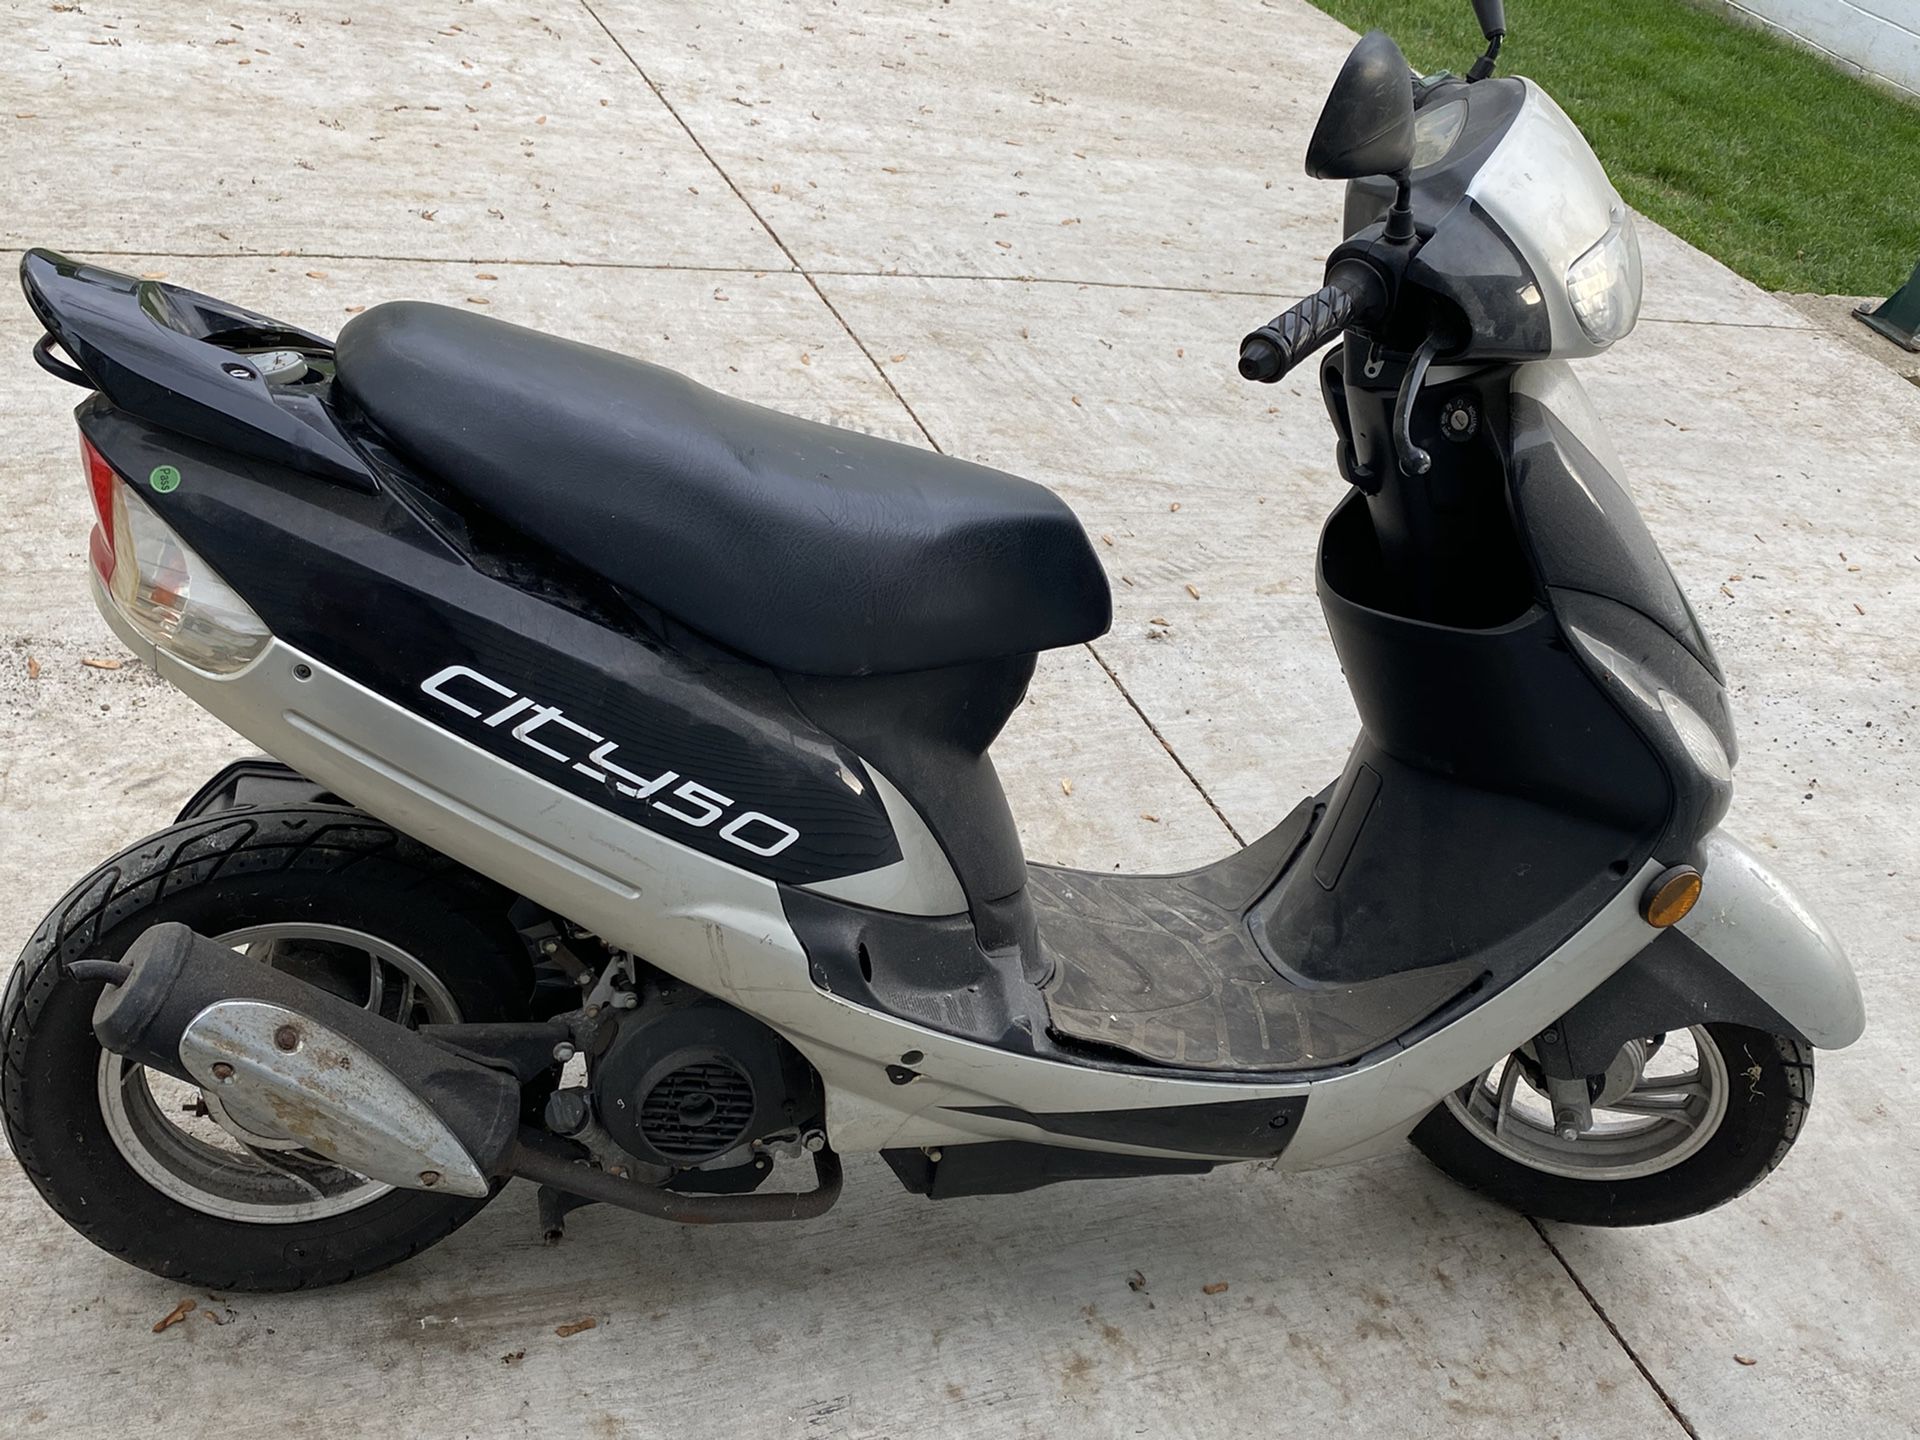 It is a city 50 has a top range of about 70, only has 507 miles on it. Tires aren’t worn at all everything is in good shape. I’ll take 1500 for it